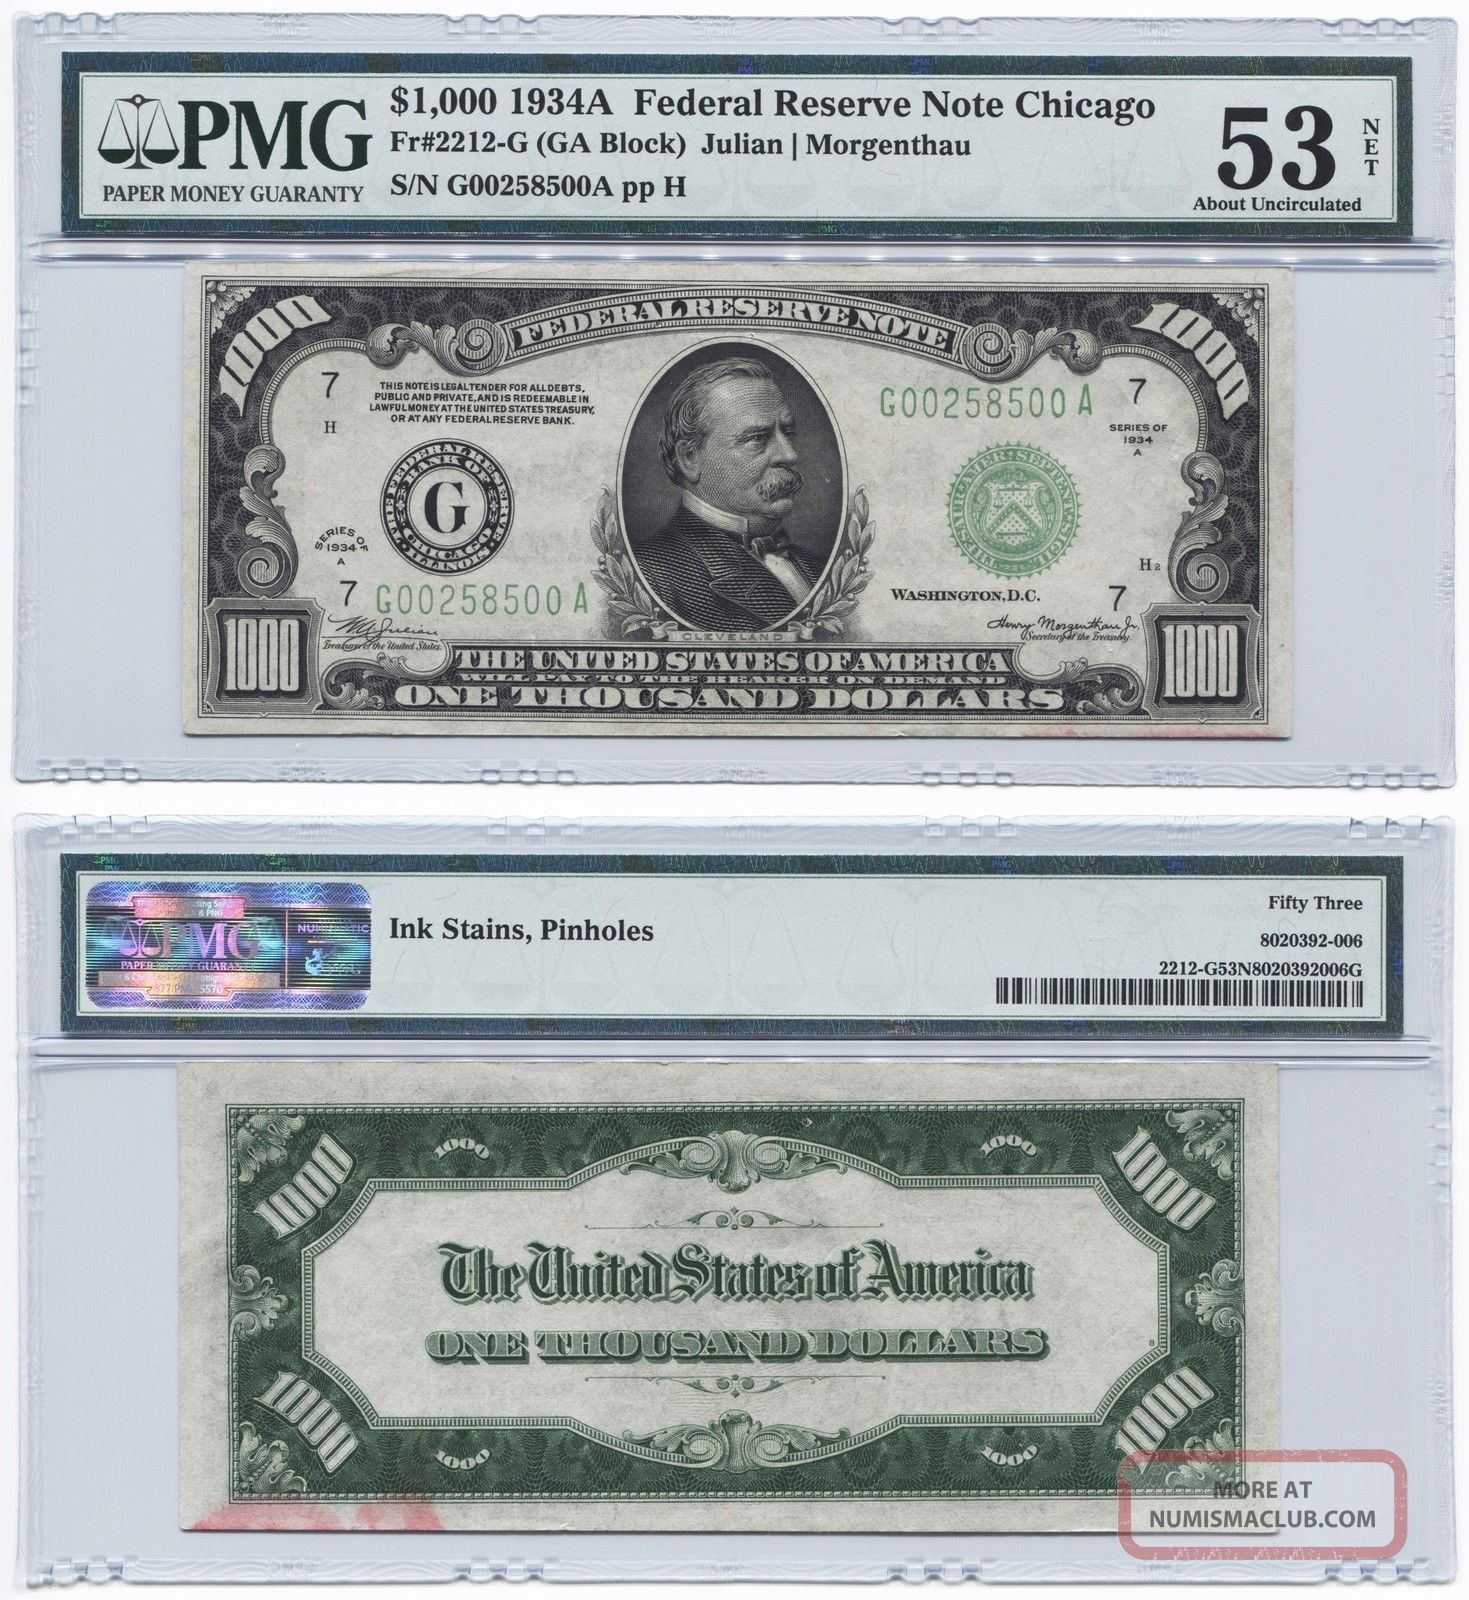 $1,  000 1934a Federal Reserve Note Chicago - Frn - Pmg 53 Net - About Unc Large Size Notes photo